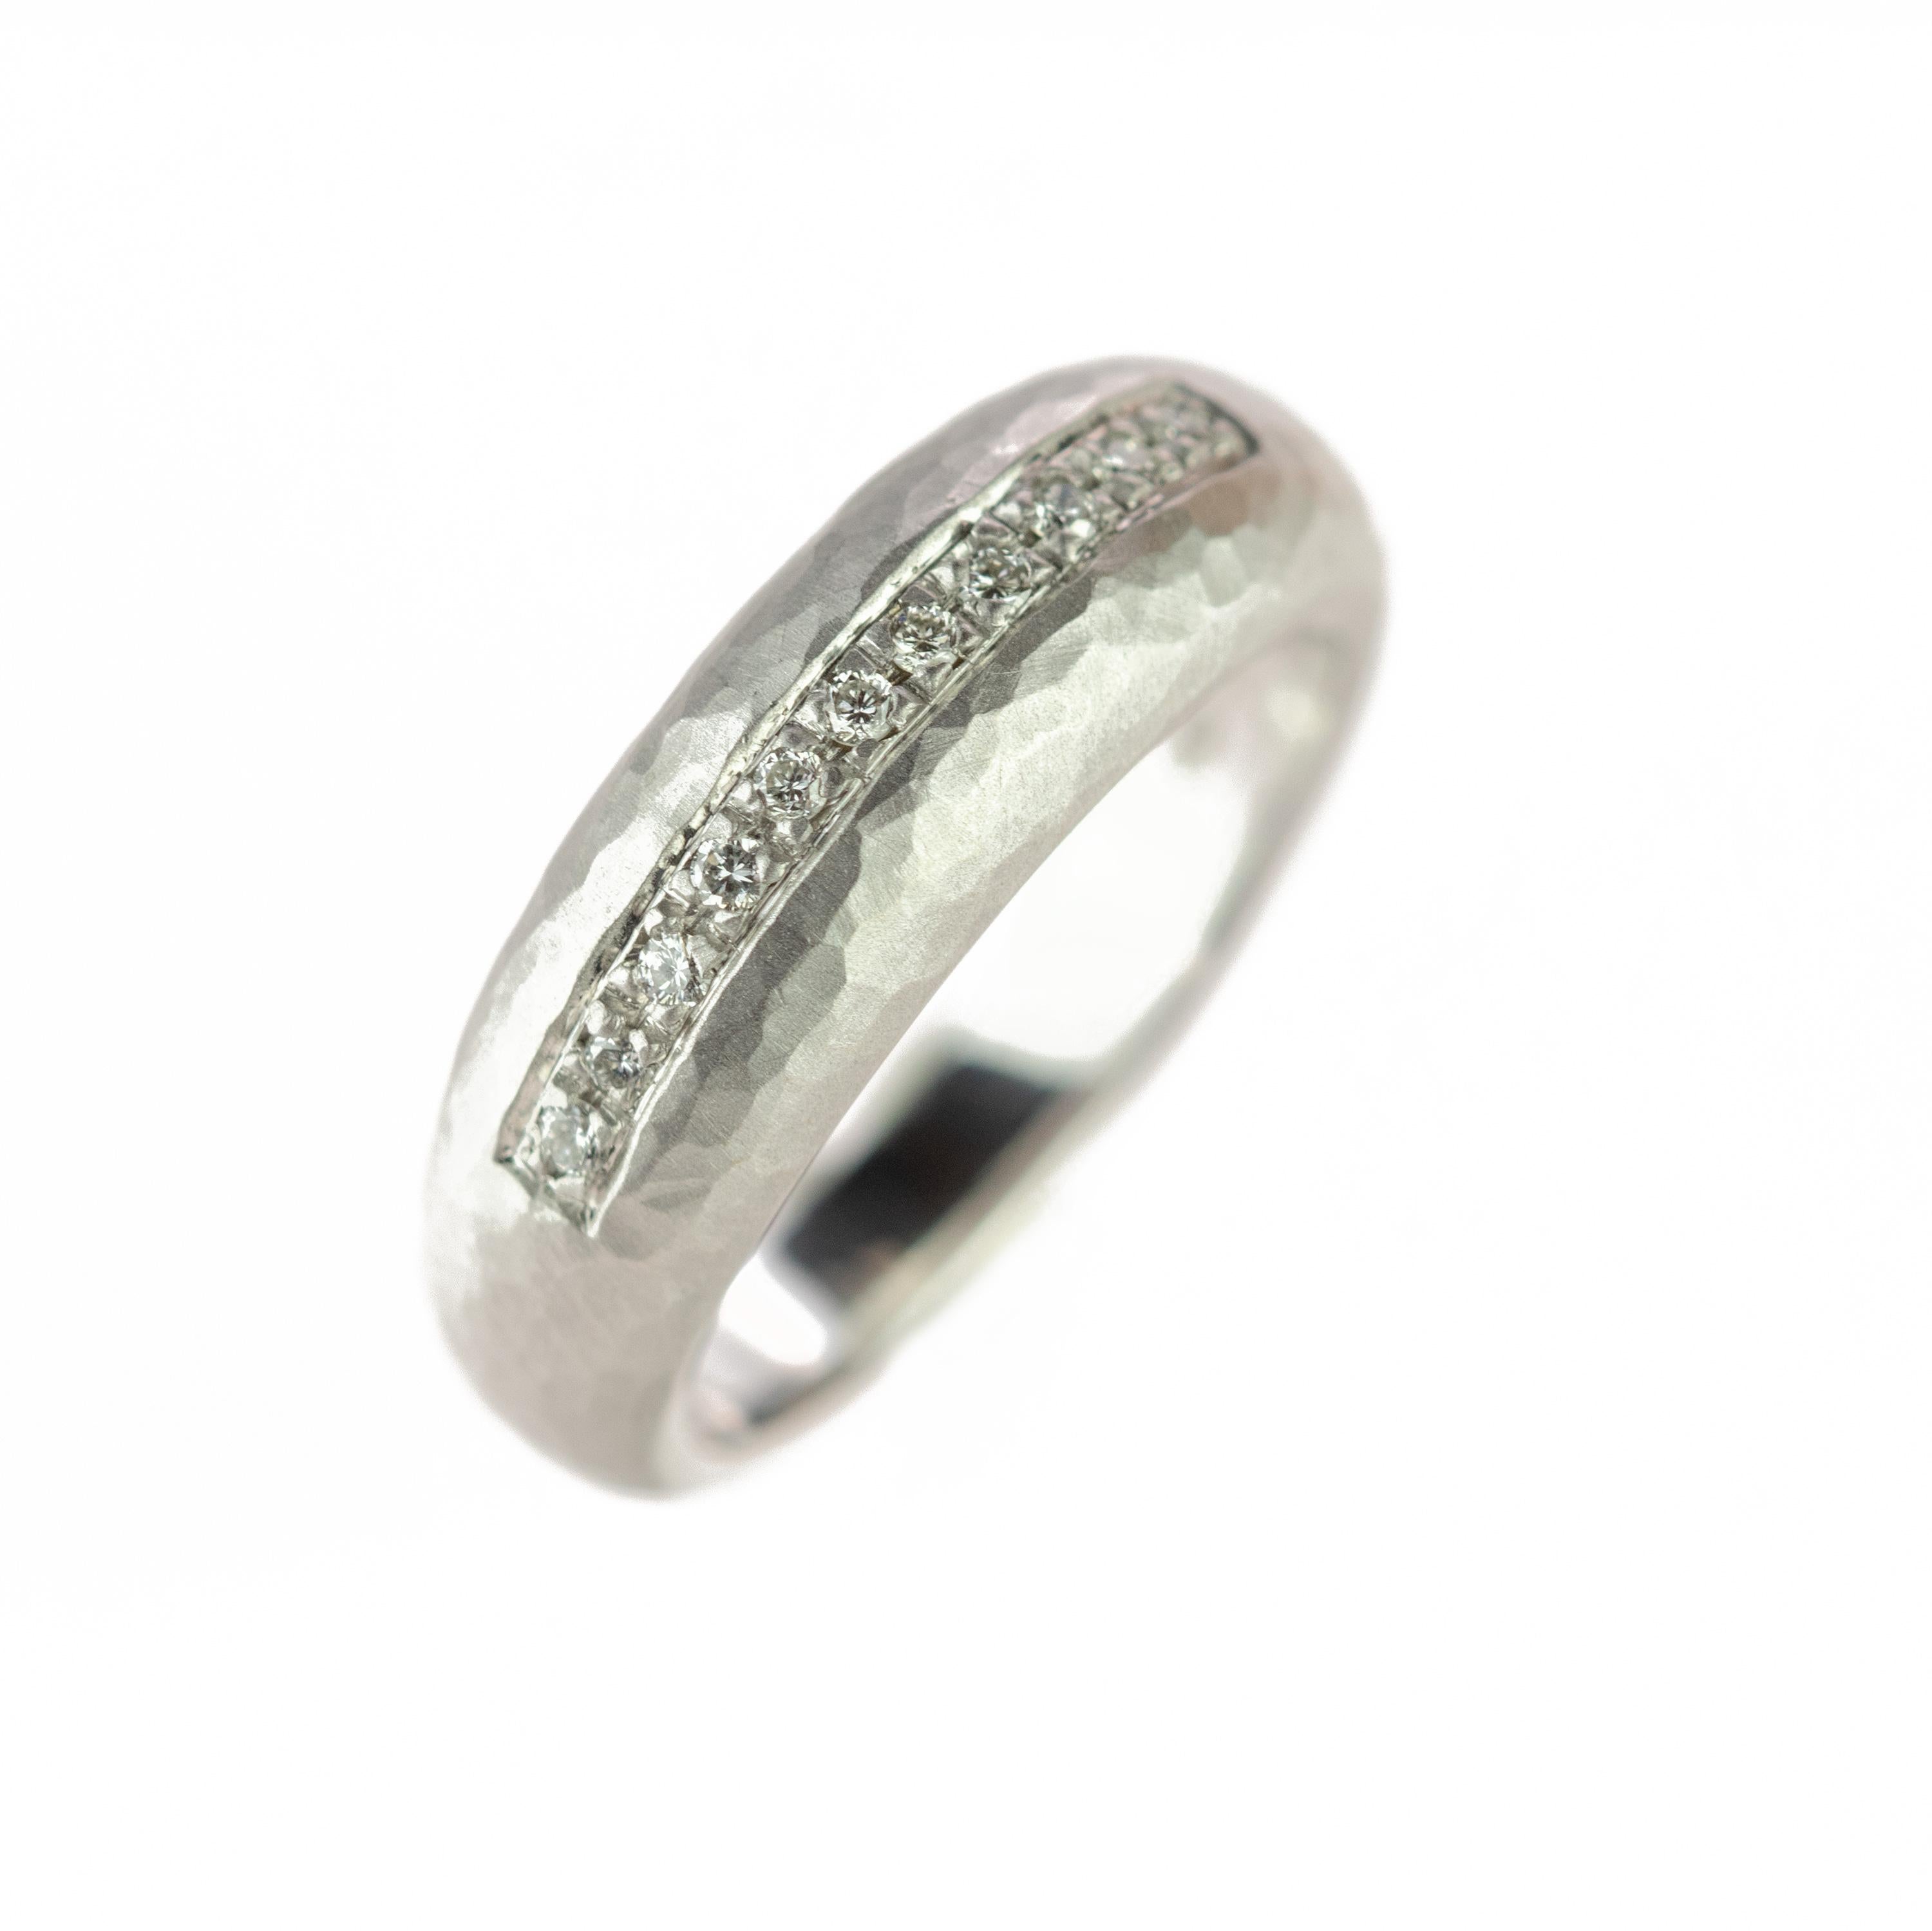 Stunning and marvelous diamond ring embellished by 18 karat carved white gold. Over 11 diamonds, 0.11 carat, create a line of gems crafted carefully to be as delicate as the band design. 
 
Legends tell that the first band rings were created at